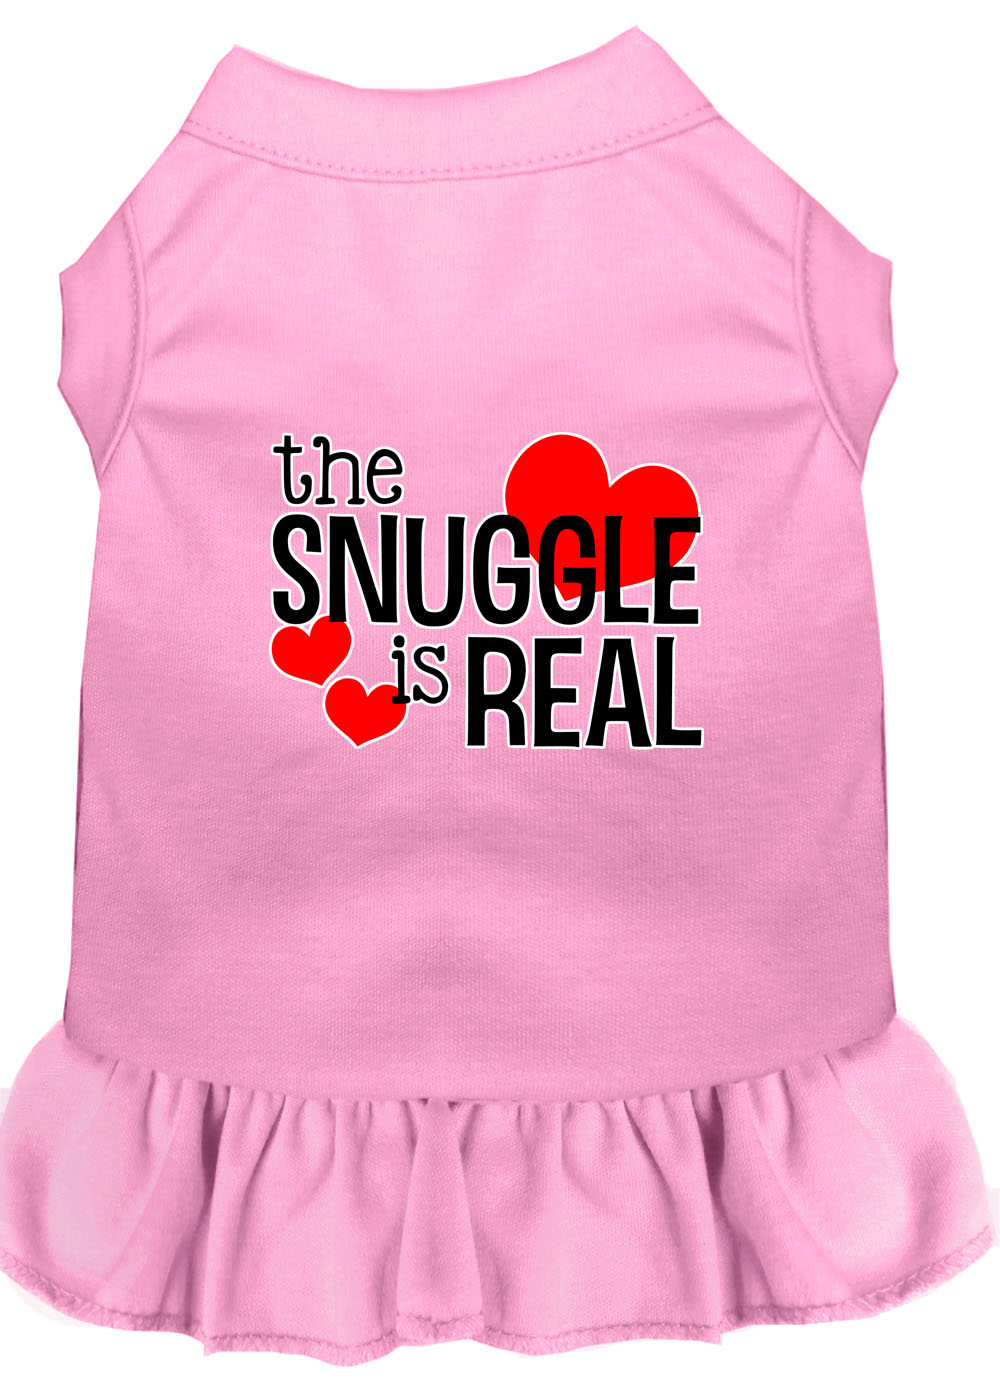 The Snuggle is Real Screen Print Dog Dress Light Pink Sm